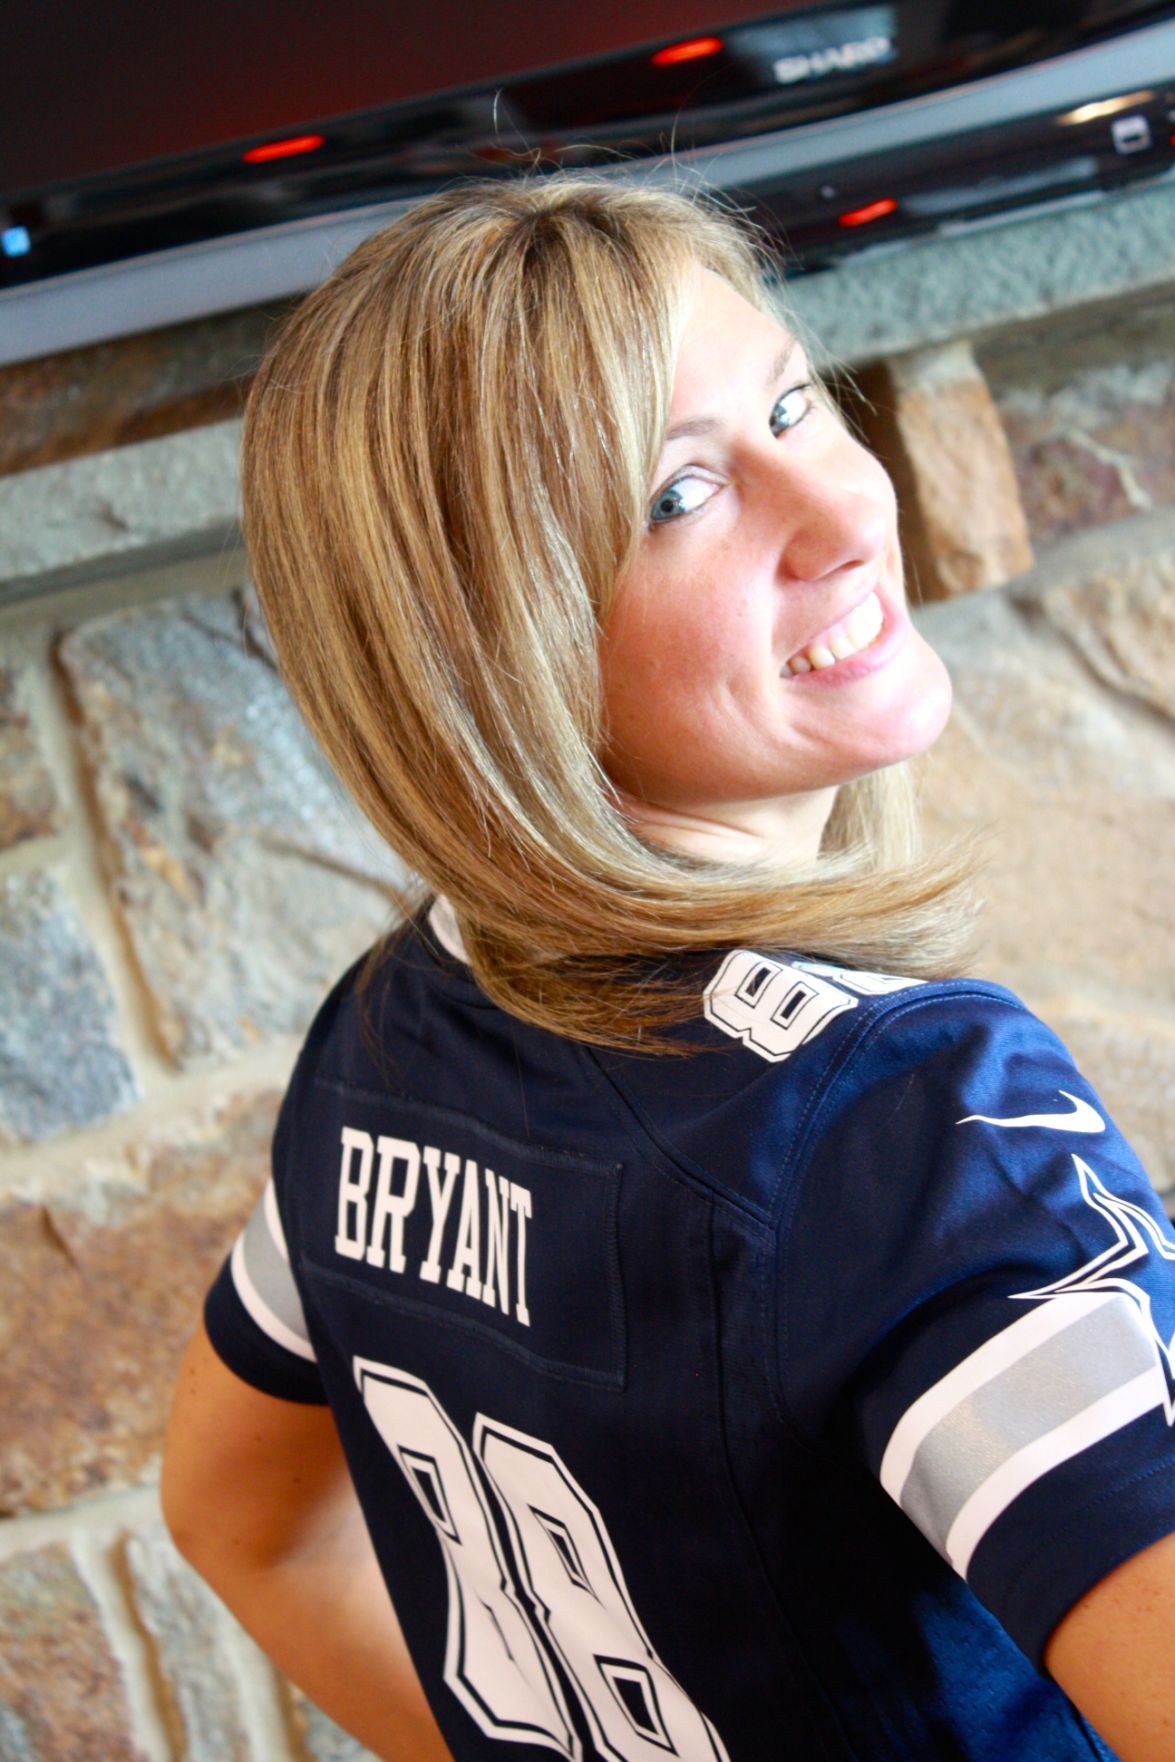 Stepping Out: State Farm agent goes from dresses to jerseys | Misc. Features ...1175 x 1762